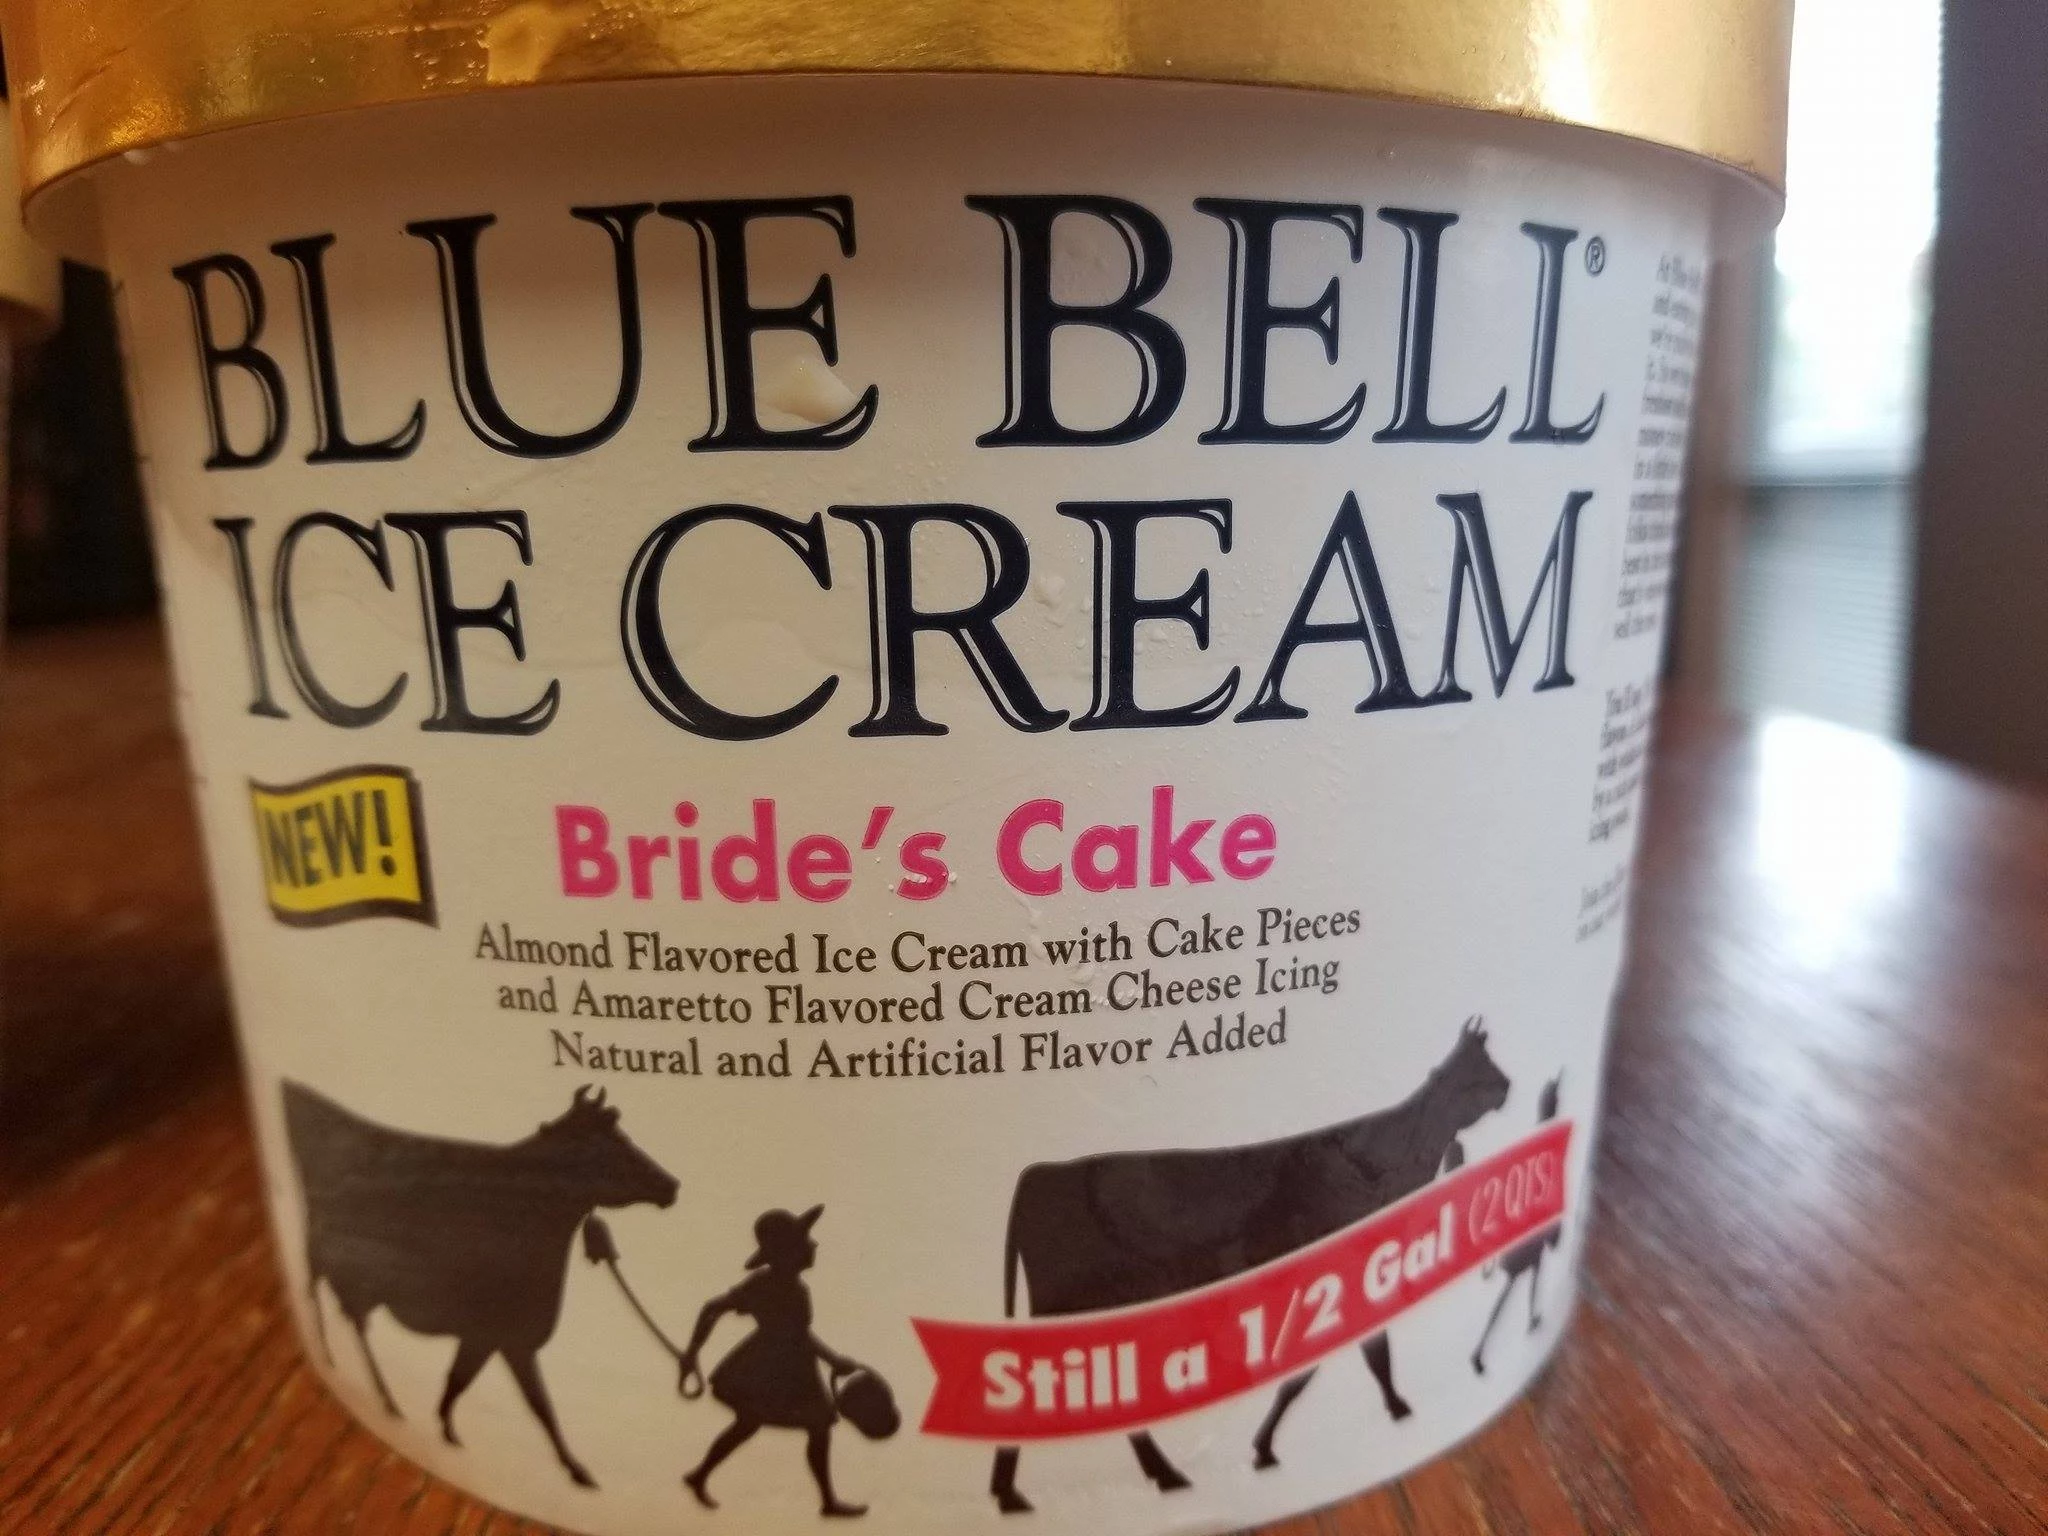 Blue Bell Ice Cream: Groom's Cake and Bride's Cake Review - YouTube